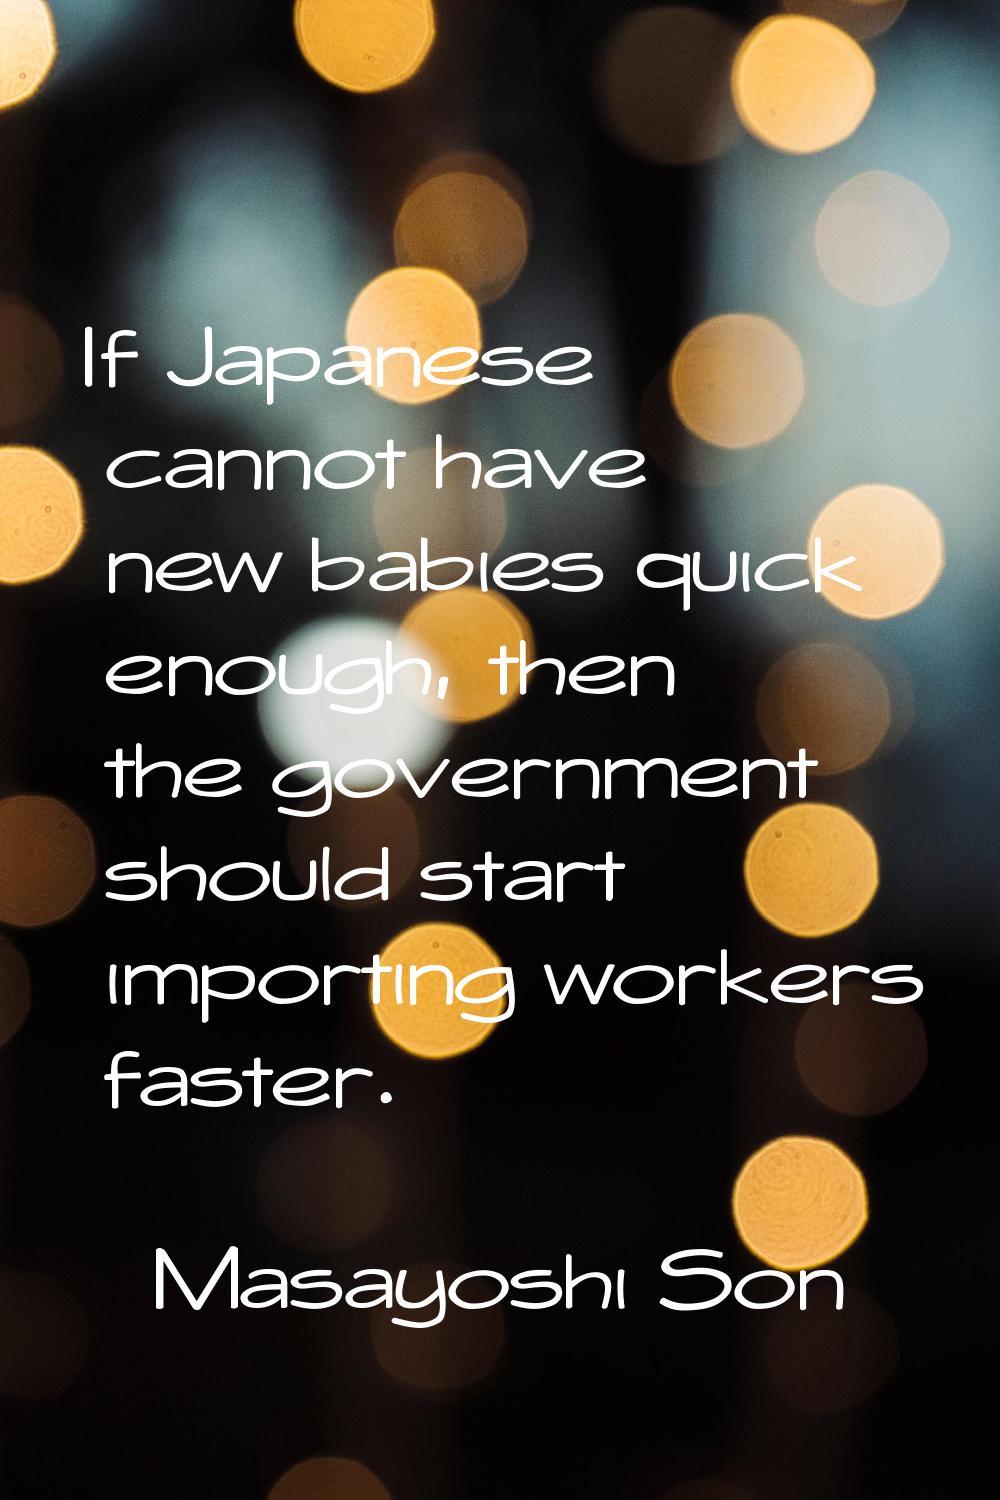 If Japanese cannot have new babies quick enough, then the government should start importing workers